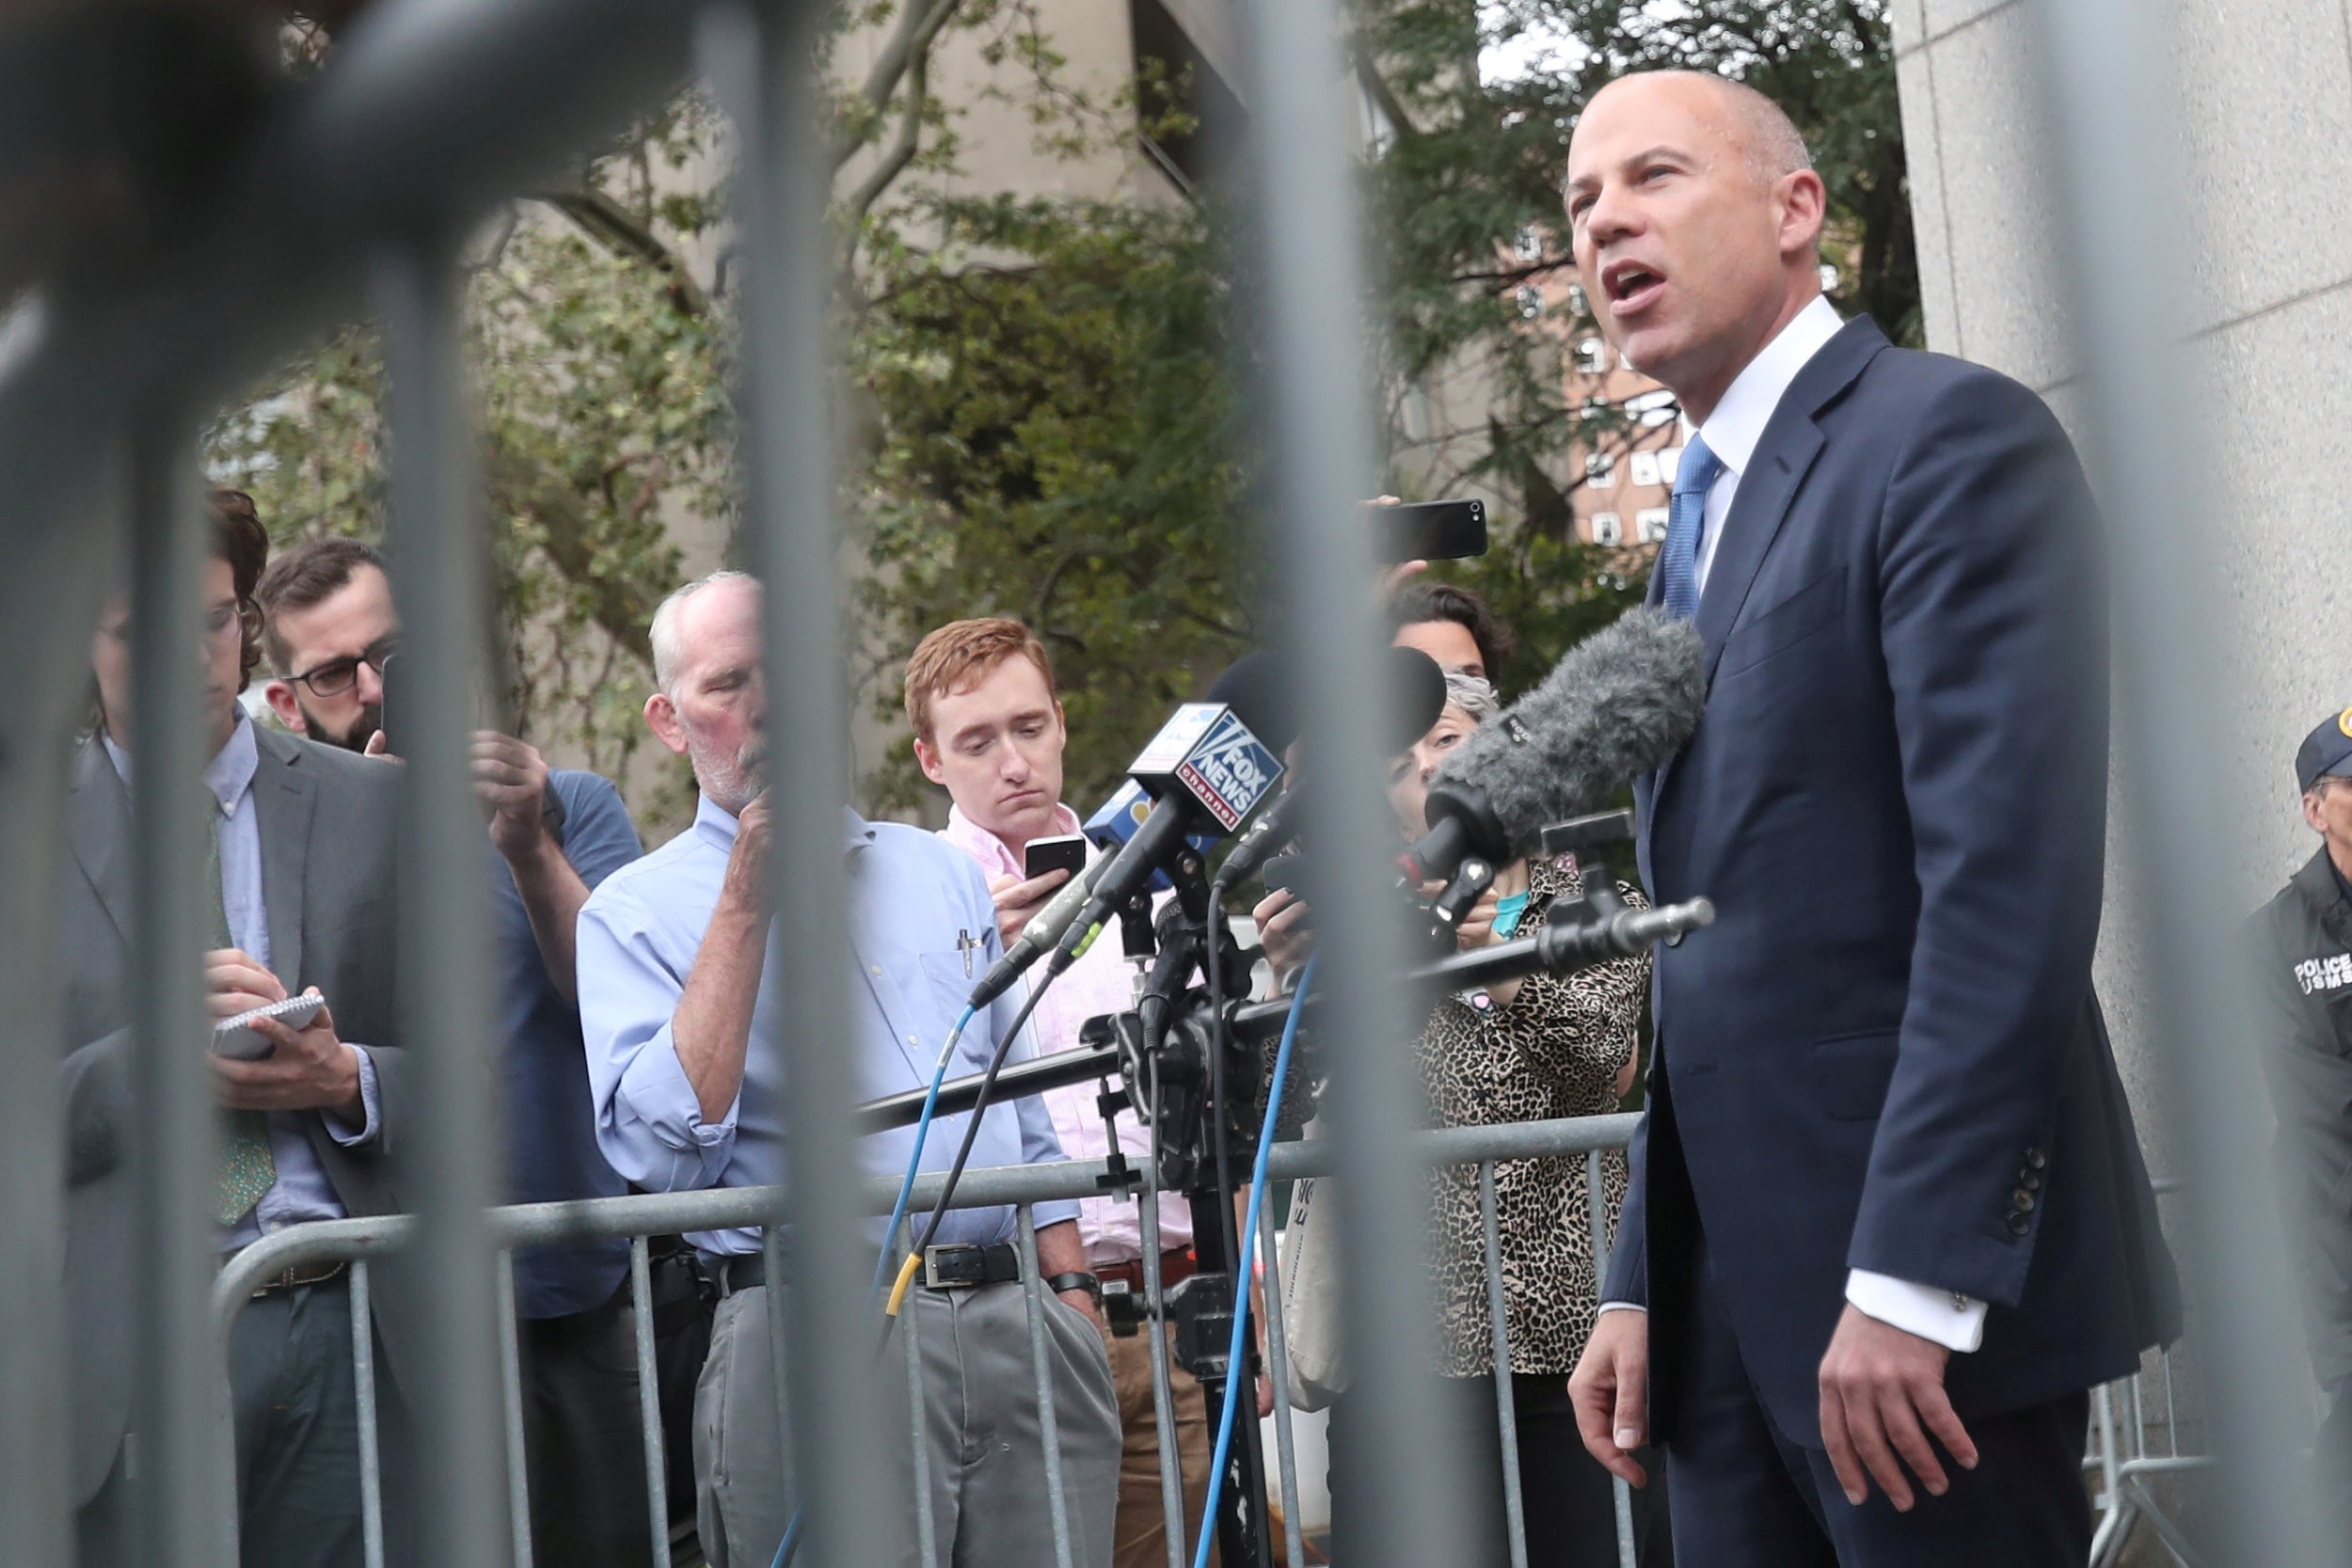 Michael Avenatti speaks to reporters outside a courthouse in New York City